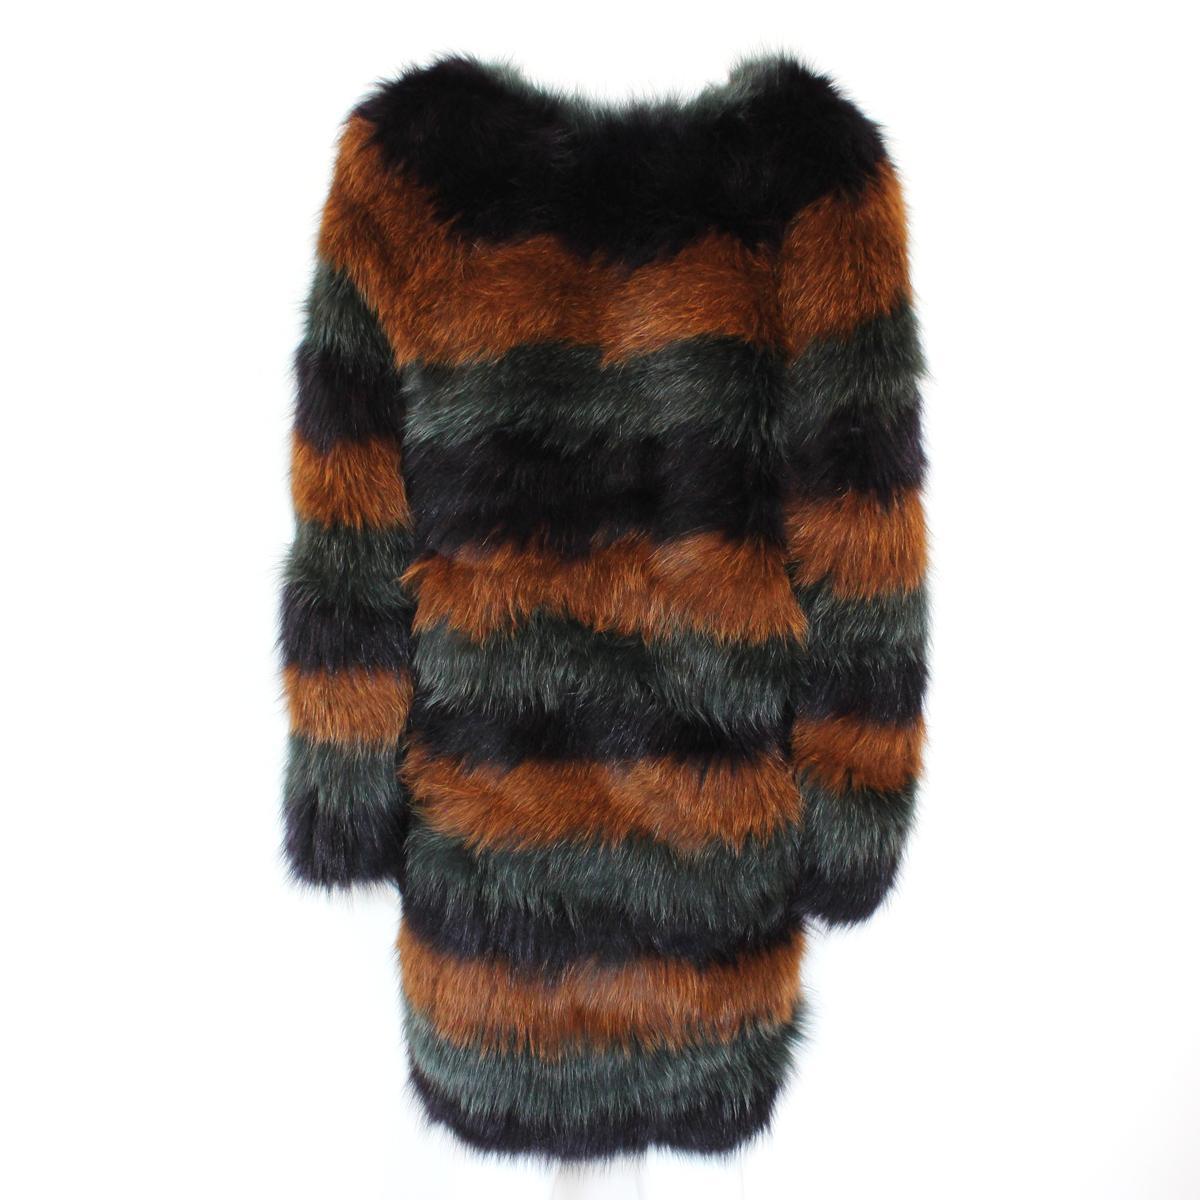 Fantastic fur coat by Meteo by Yves Solomon
Fox fur
Multicolored (blue, green, brown)
Long sleeve
2 Pockets
Hooks closure
Total length from shoulder cm 80 (31.4 inches)
Original price € 1900
Worldwide express shipping included in the price !